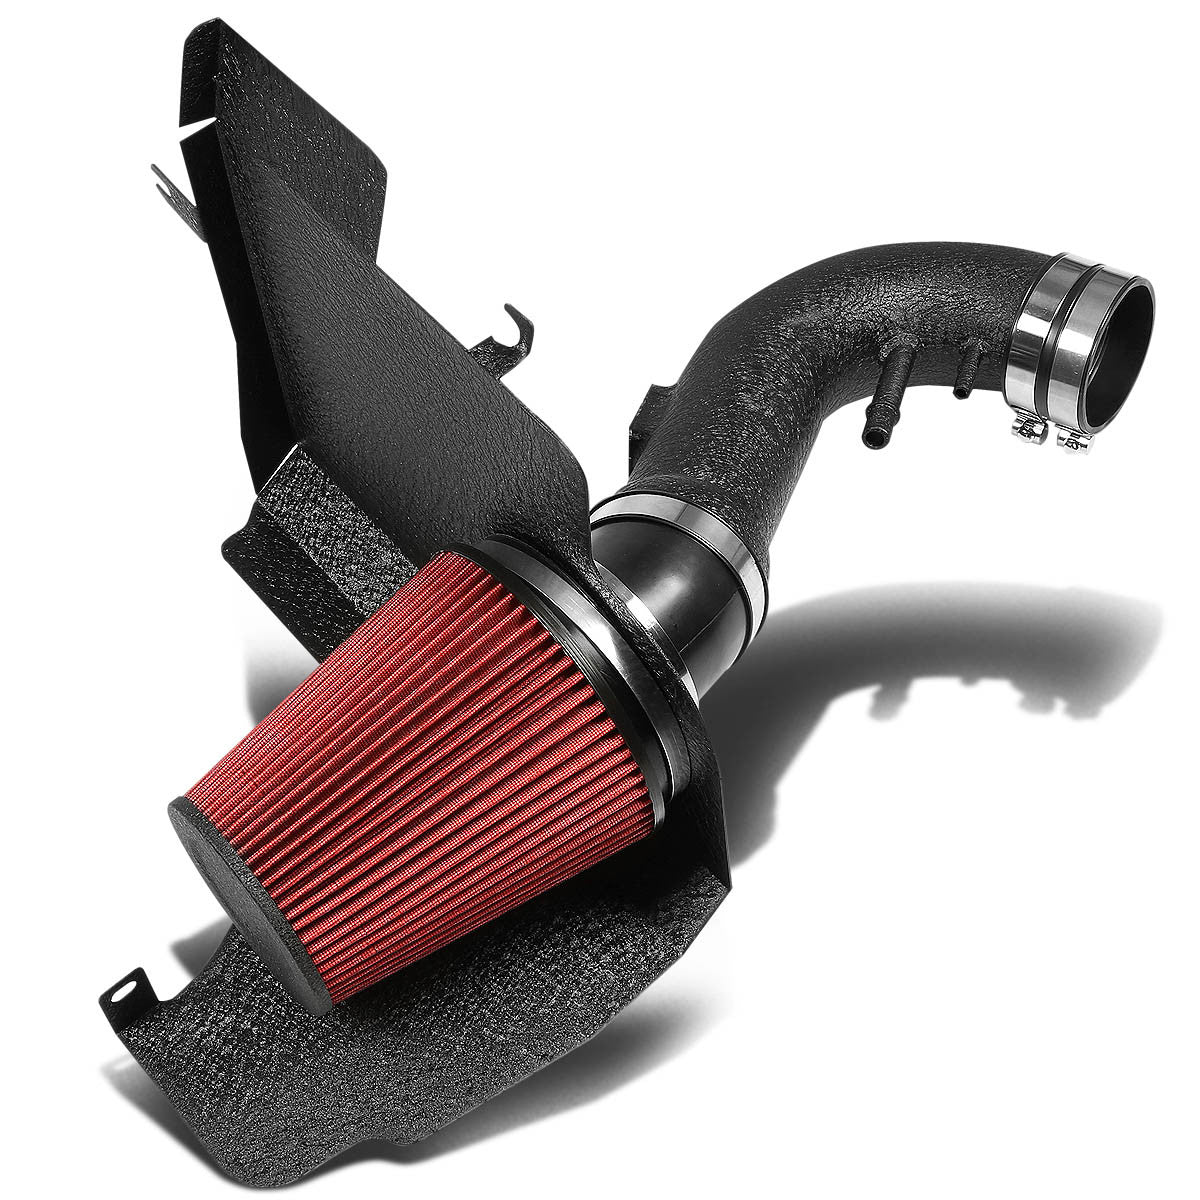 11-14 Ford Mustang 5.0L V8 Black Cold Air Intake w/Heat Shield+Cone Filter